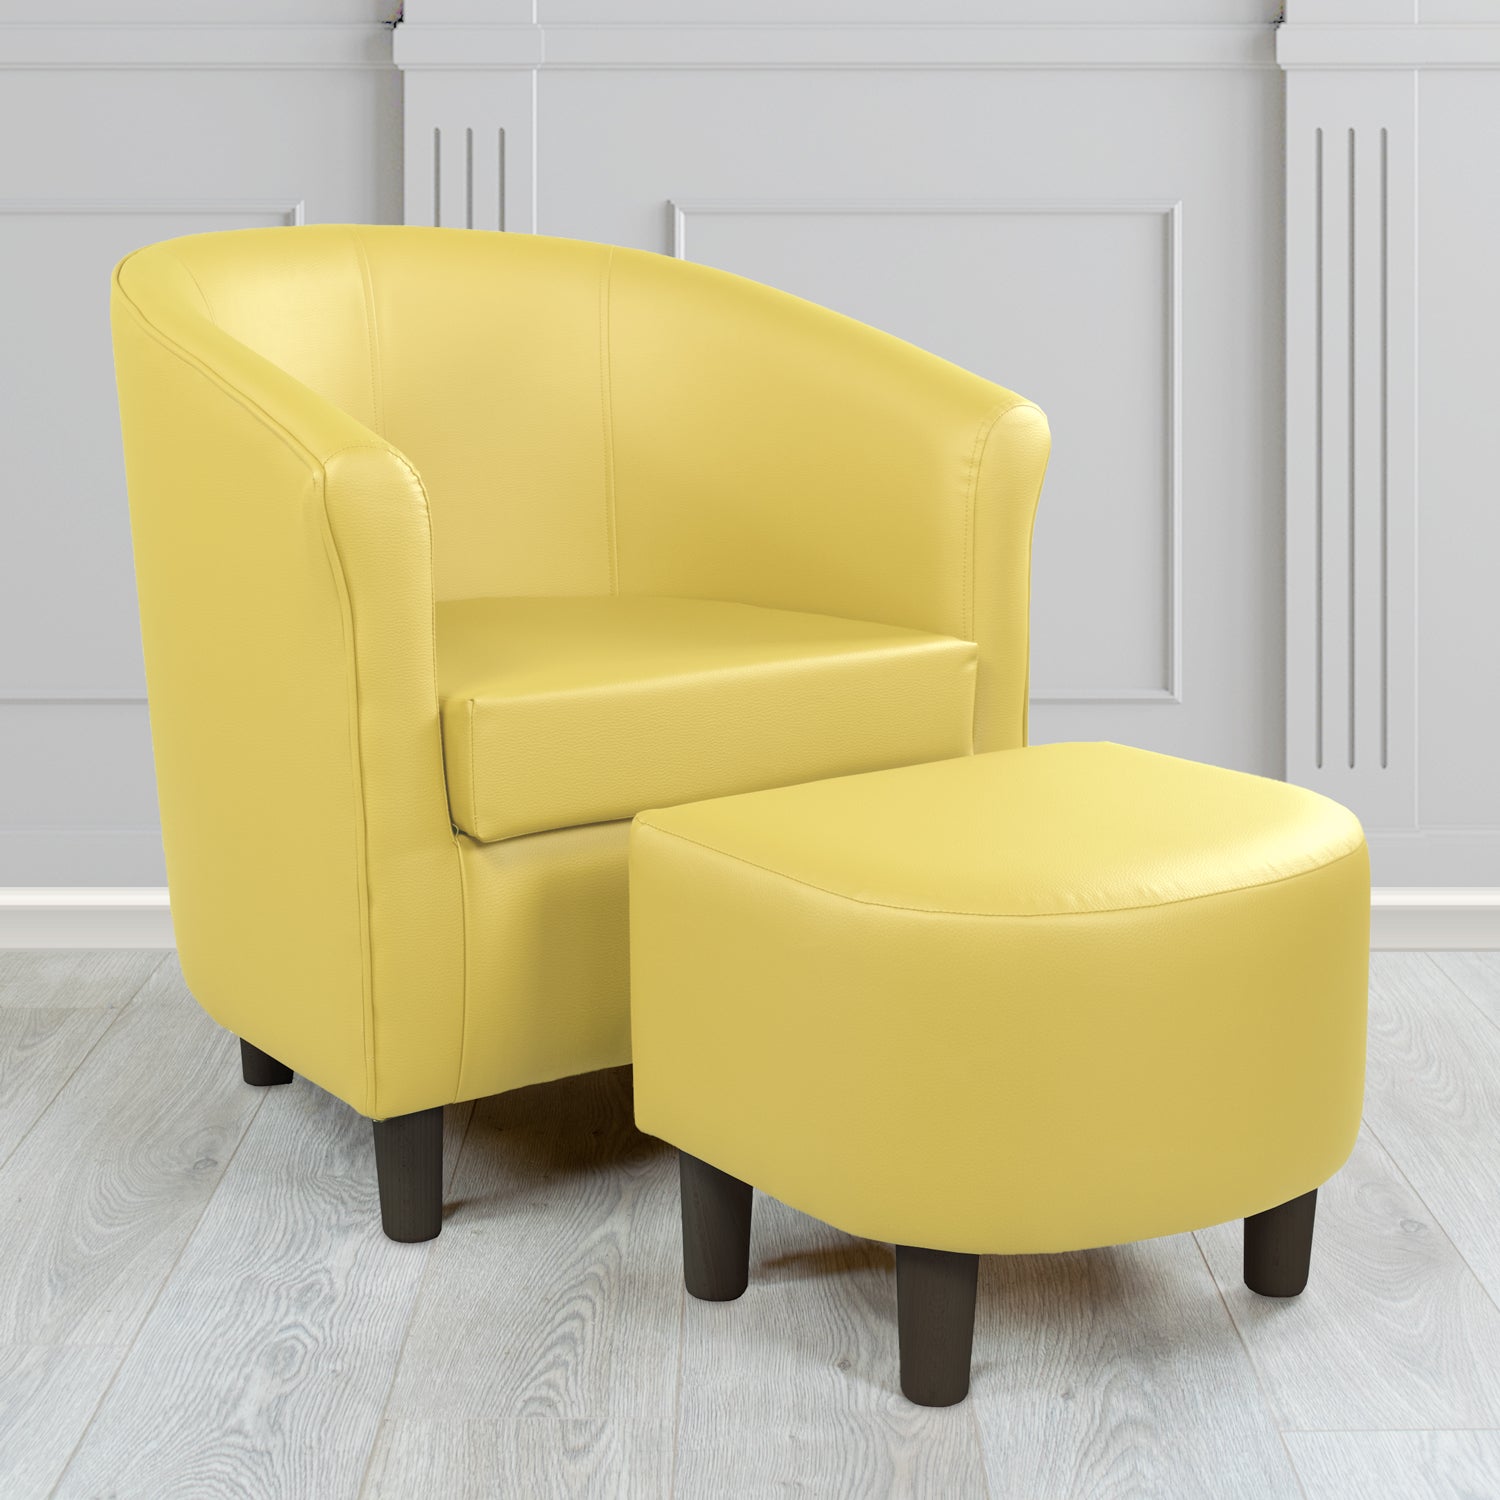 Tuscany Just Colour Primrose Faux Leather Tub Chair with Footstool Set - The Tub Chair Shop